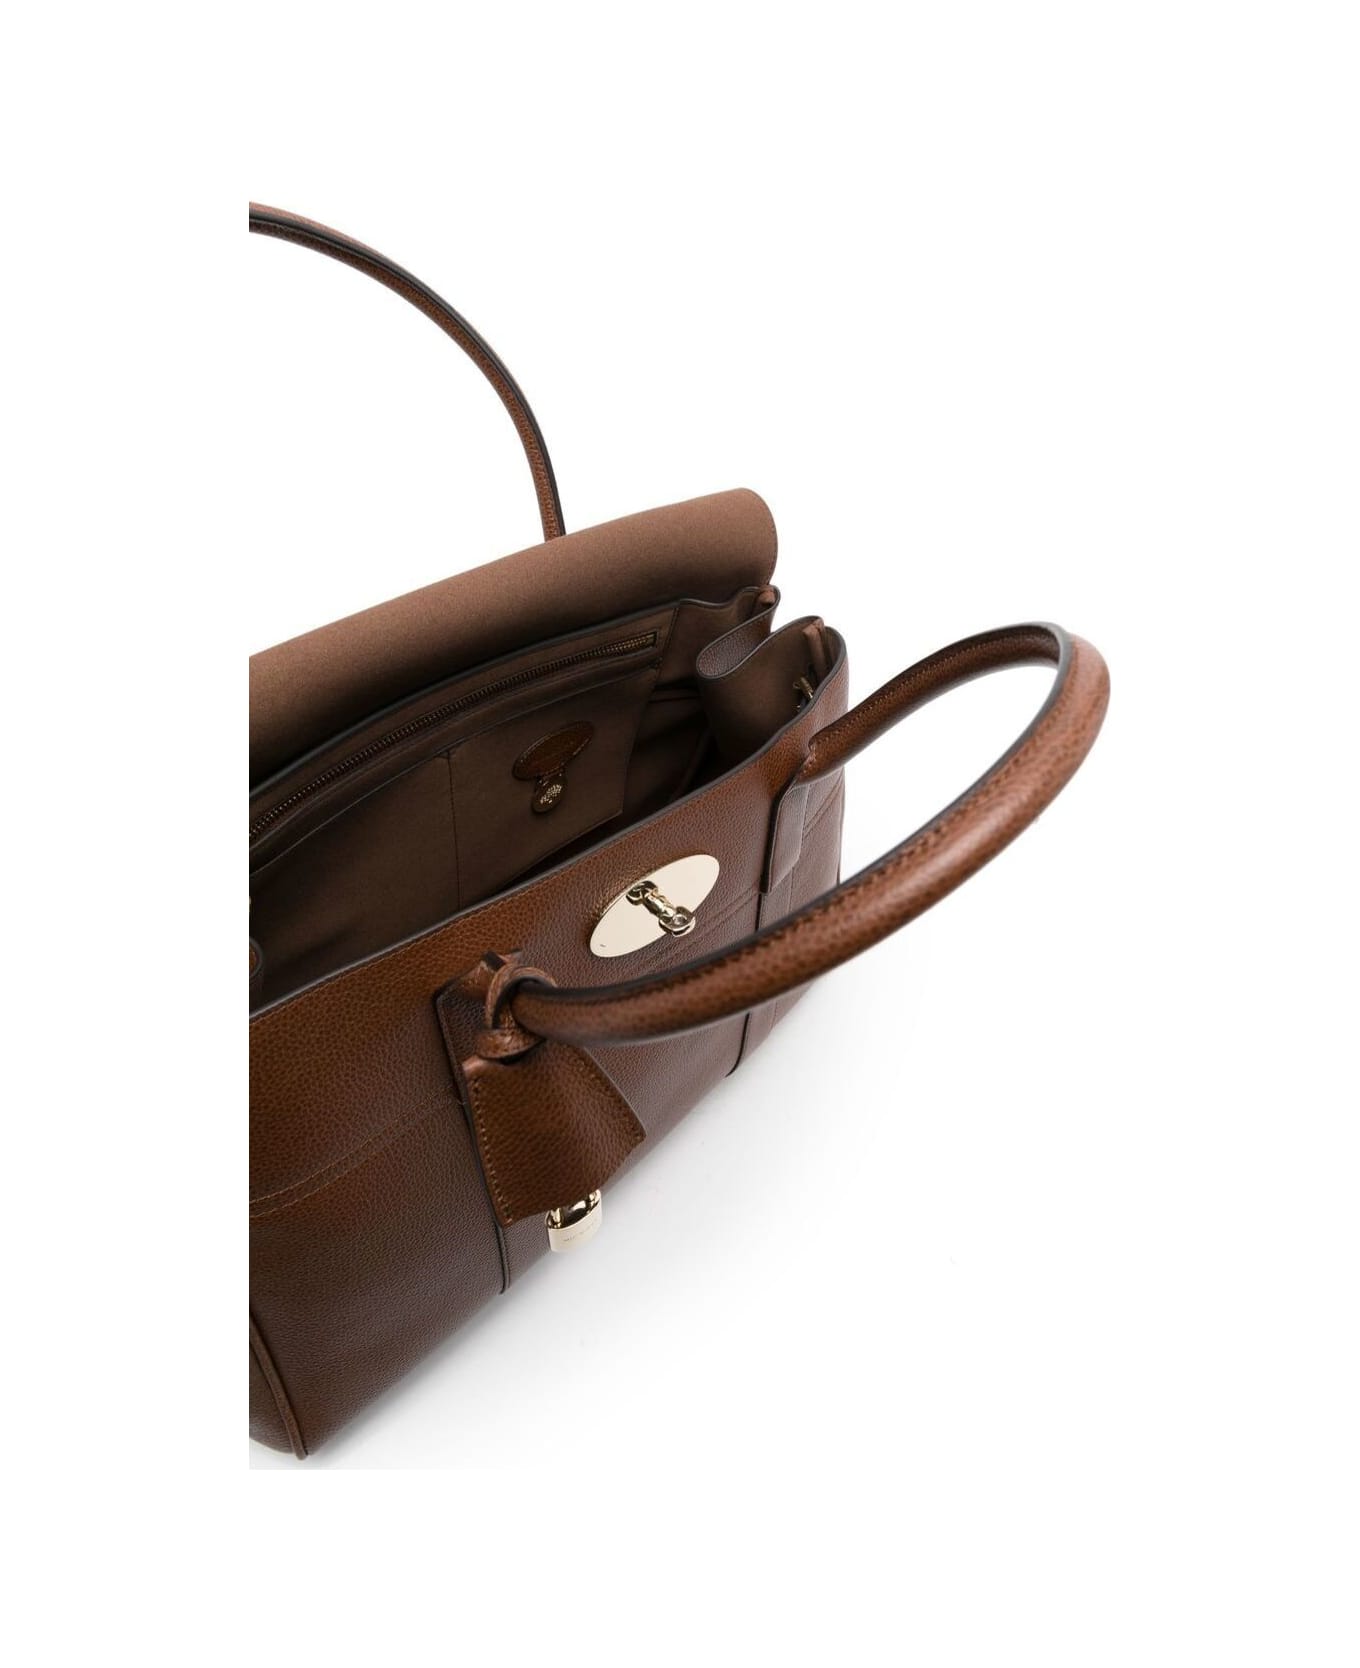 Mulberry Bayswater Brown Leather Handbag Mulberry Woman - Brown